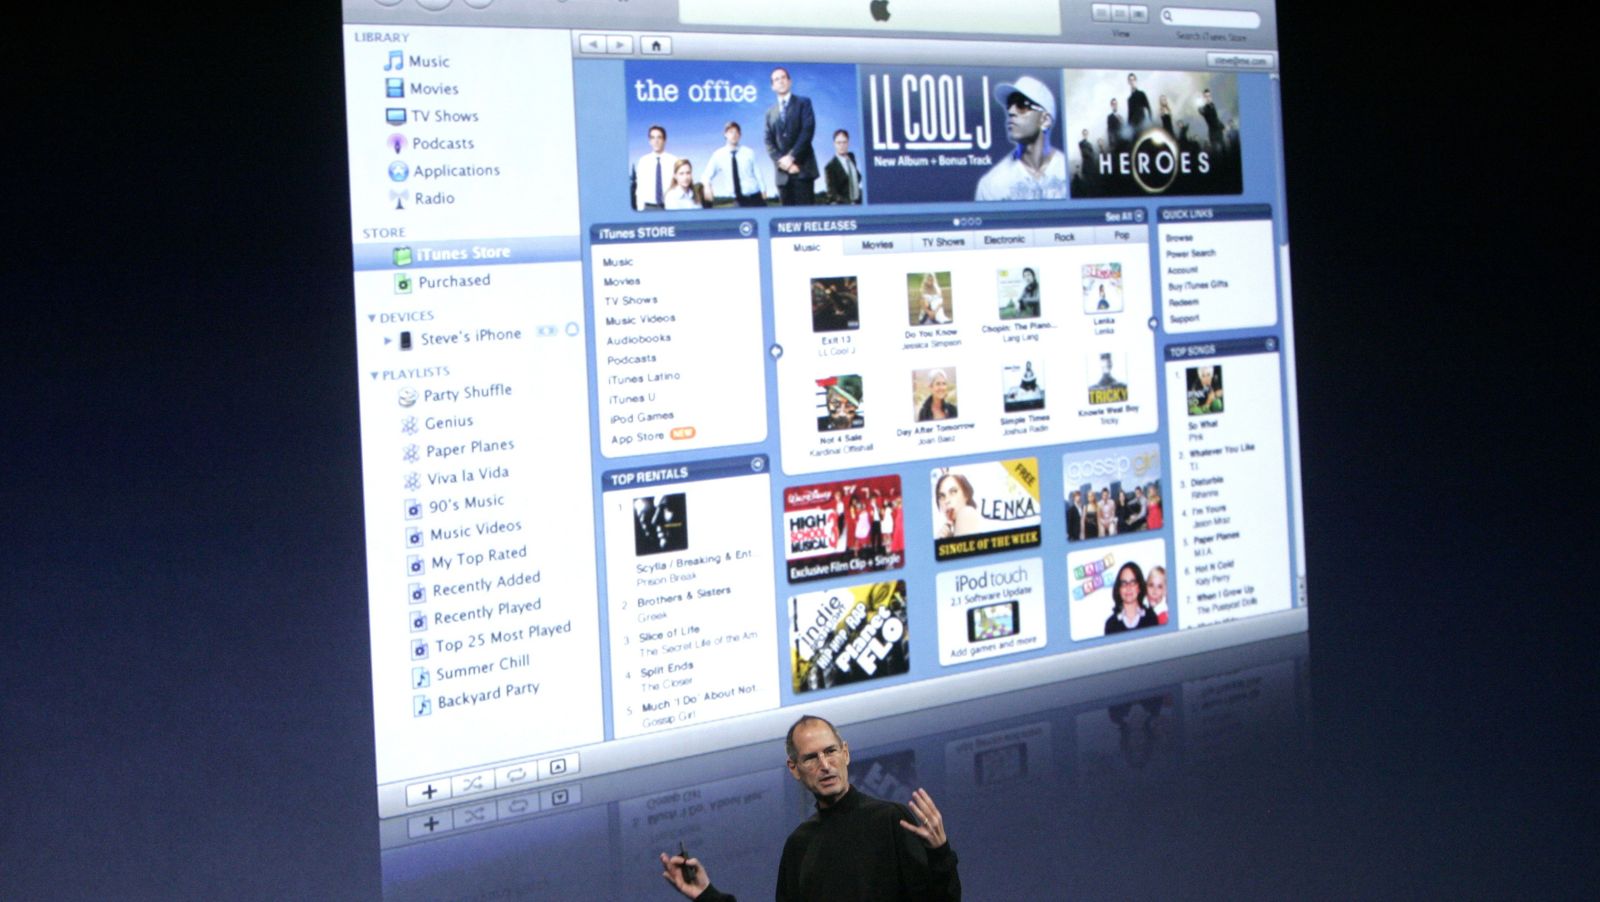 Steve Jobs at Apple event, talking about the iTunes Store